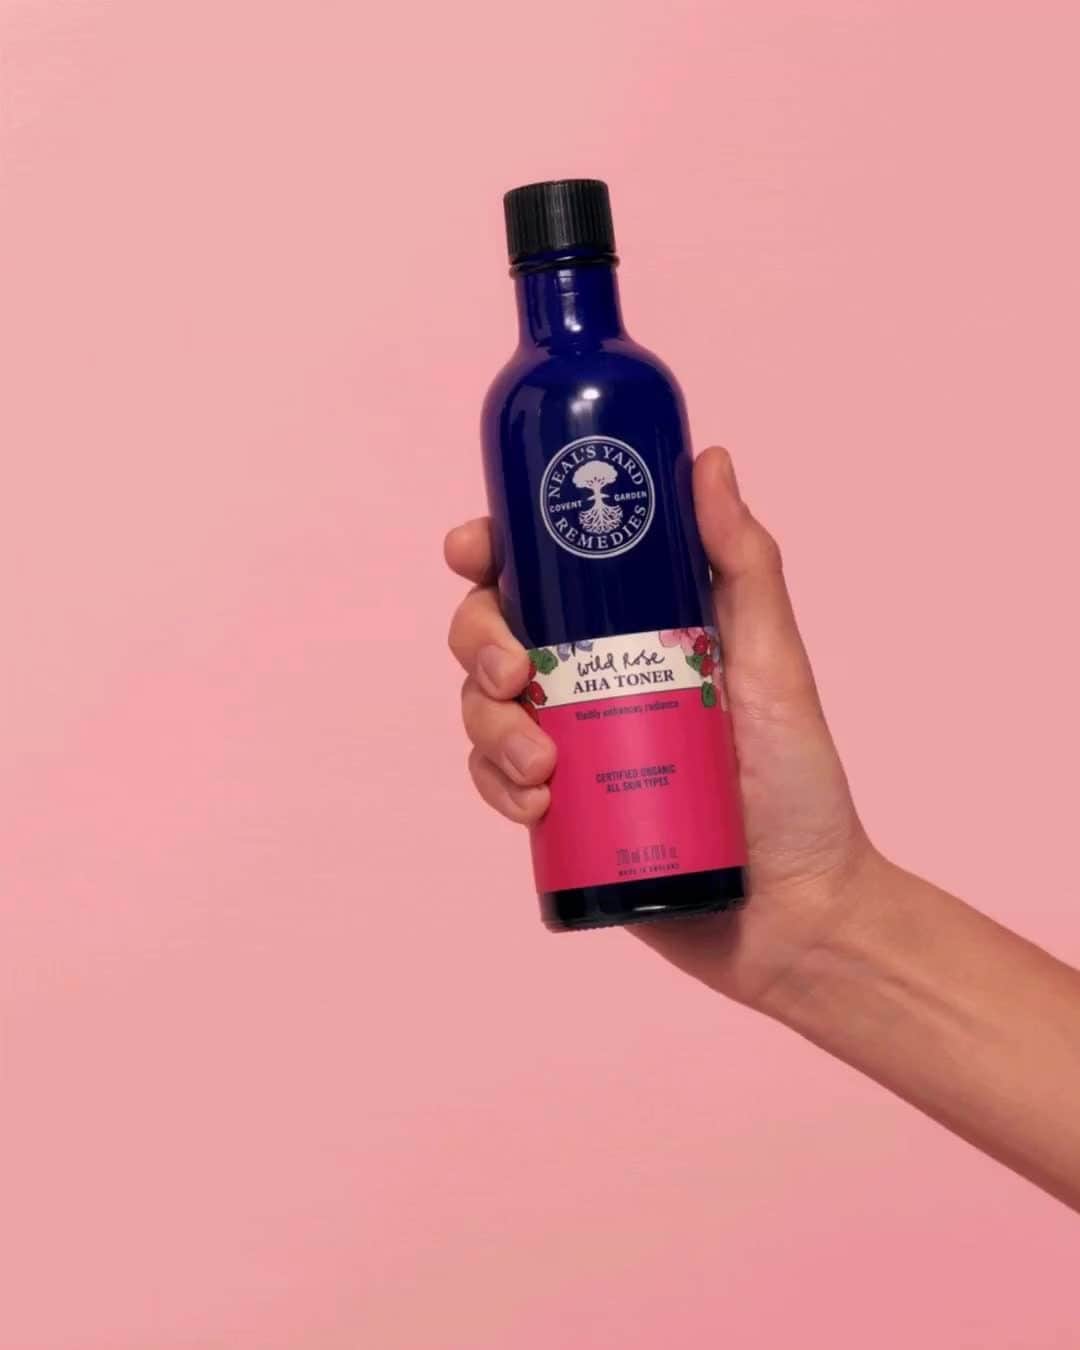 Neal's Yard Remediesのインスタグラム：「Get that glow with our Wild Rose AHA Toner 🌟⁠ ⁠ Inspired by cult favourite Wild Rose Beauty Balm, our certified organic Wild Rose Skincare collection is a complete beauty ritual to visibly enhance radiance. 🌹⁠ ⁠ Formulated with glow-giving organic wild rosehip seed oil and high-performance natural and organic ingredients to brighten and nourish, this indulgent collection will help to reveal your natural glow. ​✨⁠ ⁠ Now 20% off alongside the entire Wild Rose Skincare collection in our Spring Event. ⁠ ⁠ What's your favourite Wild Rose product? 👀. Comment below...」